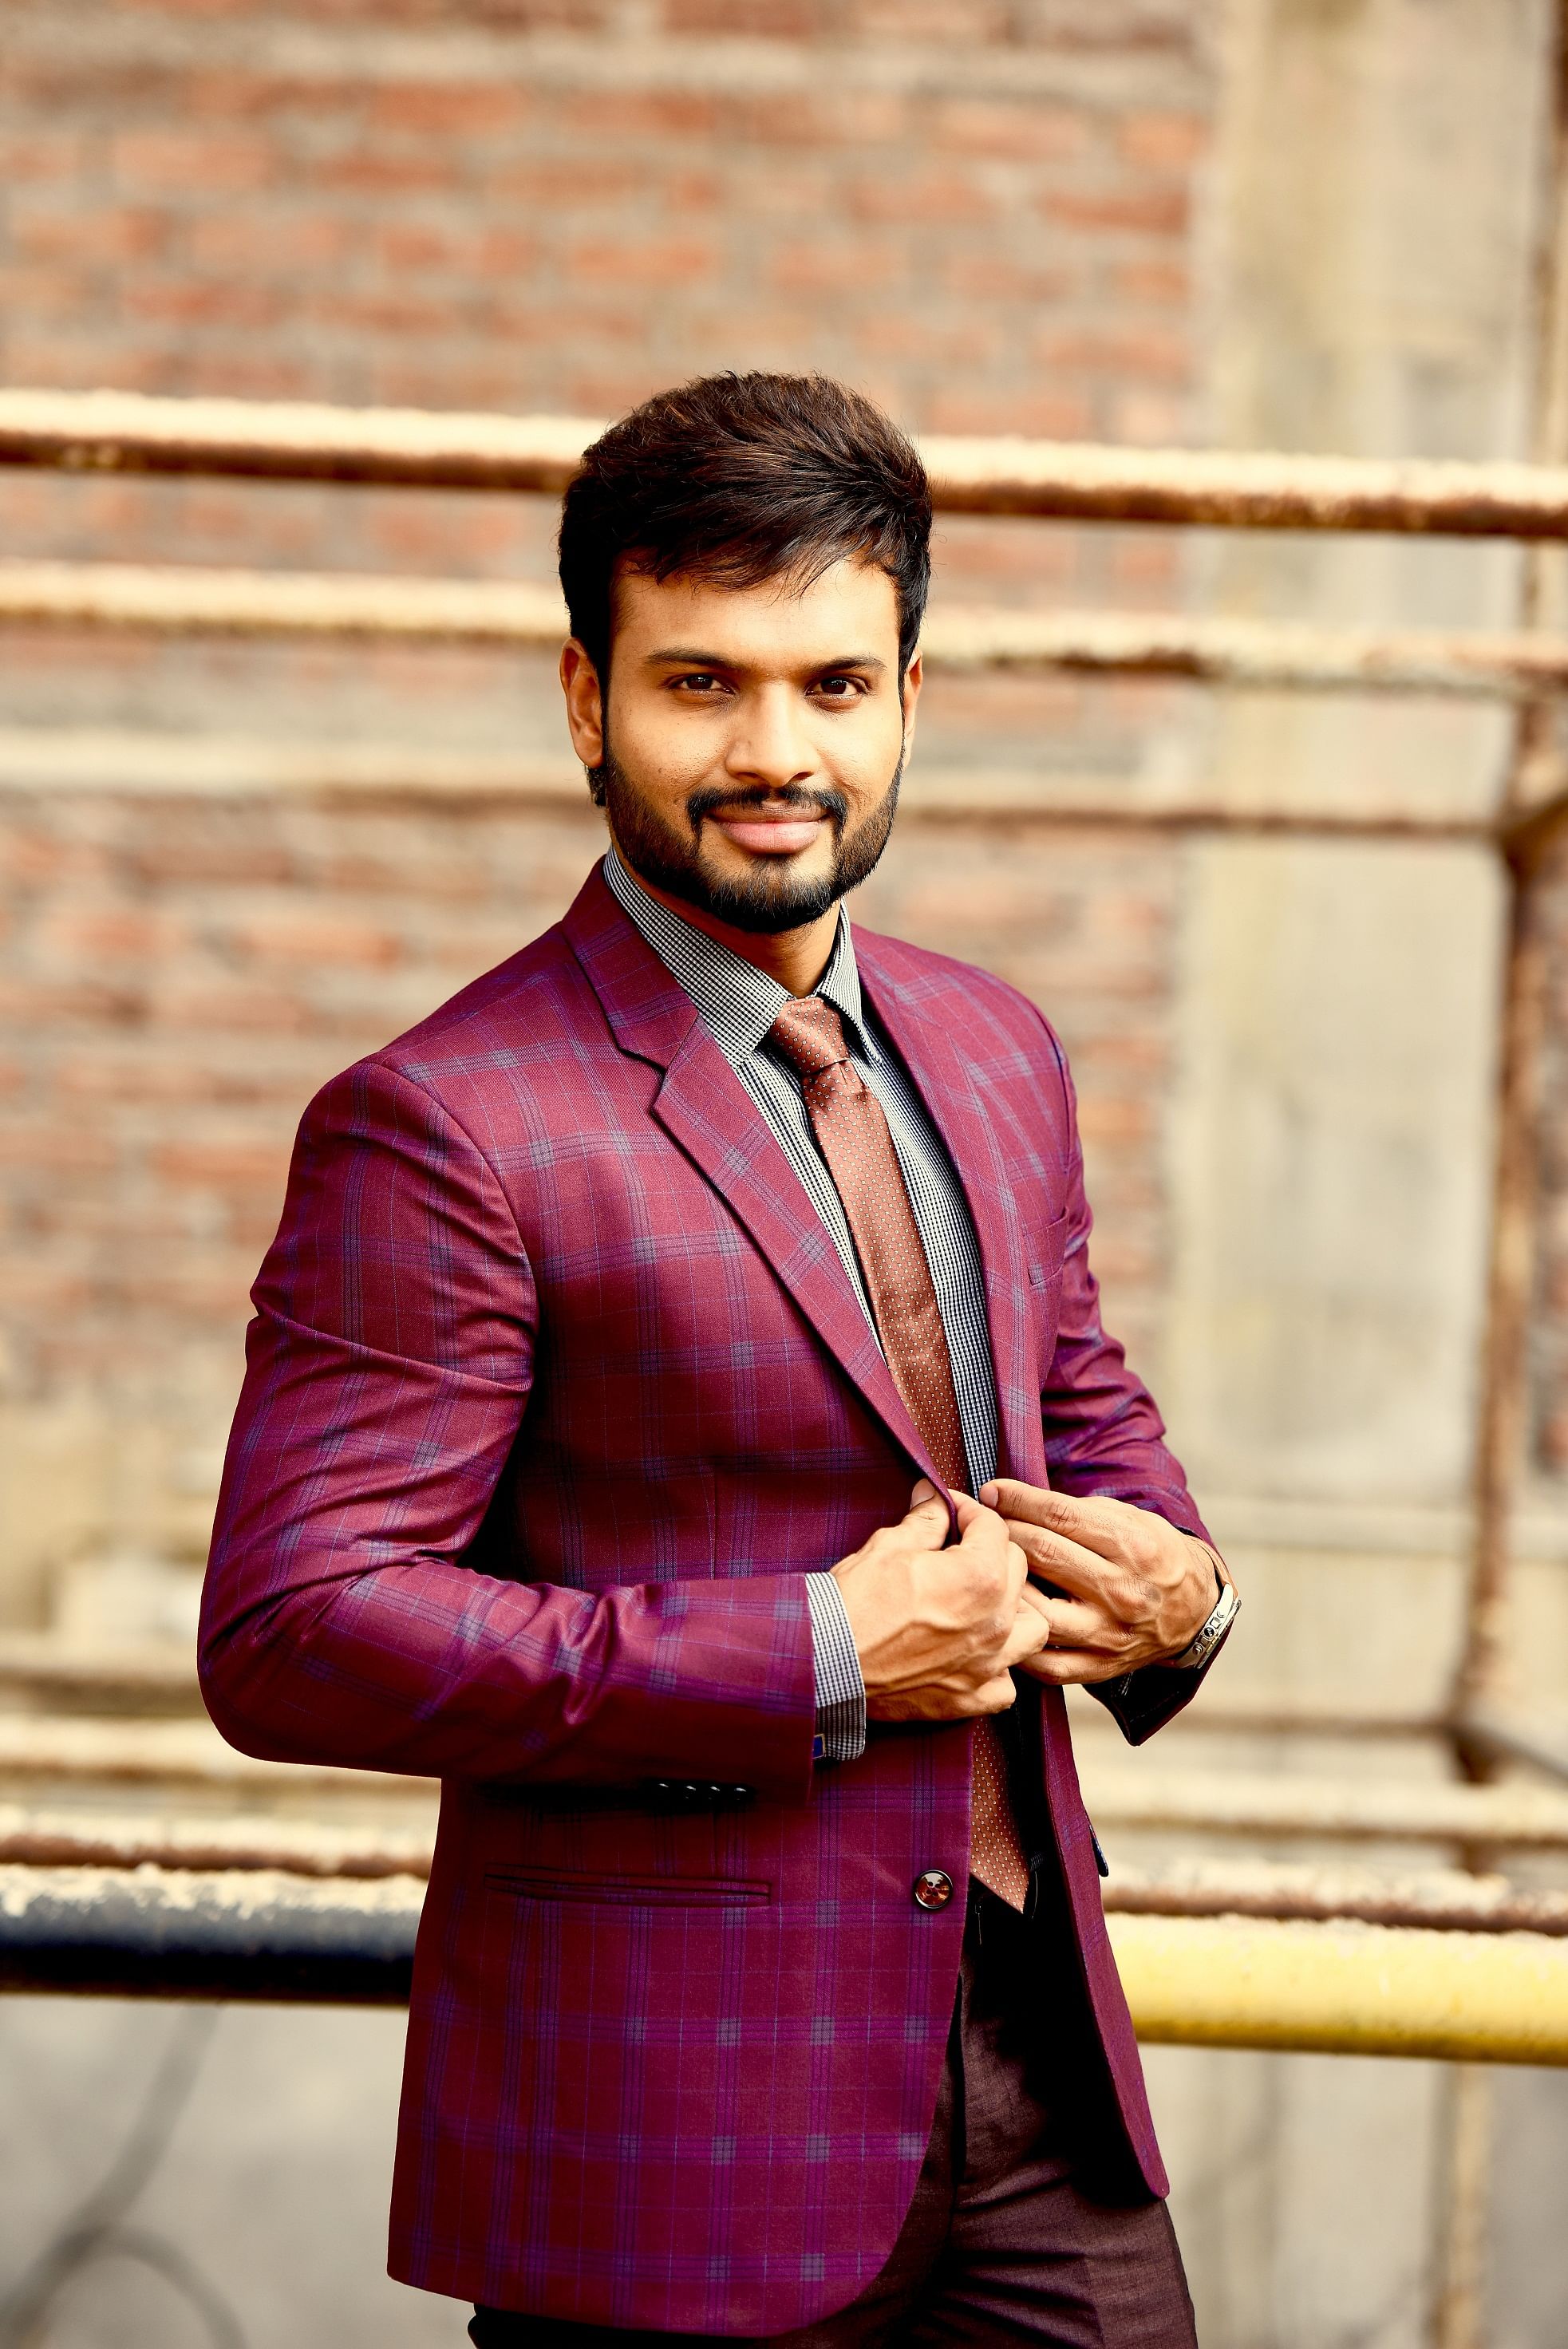 Actor Sumanth Shailendra made his debut in the Kannada film industry with ‘Dilwale’. His other notable projects in Kannada include ‘Tirupati Express’, ‘Bettanagere’ and ‘Bhale Jodi’. He recently ventured into the Telugu film industry with ‘Brand Babu’, releasing in the first week of August. He also recently turned a producer.